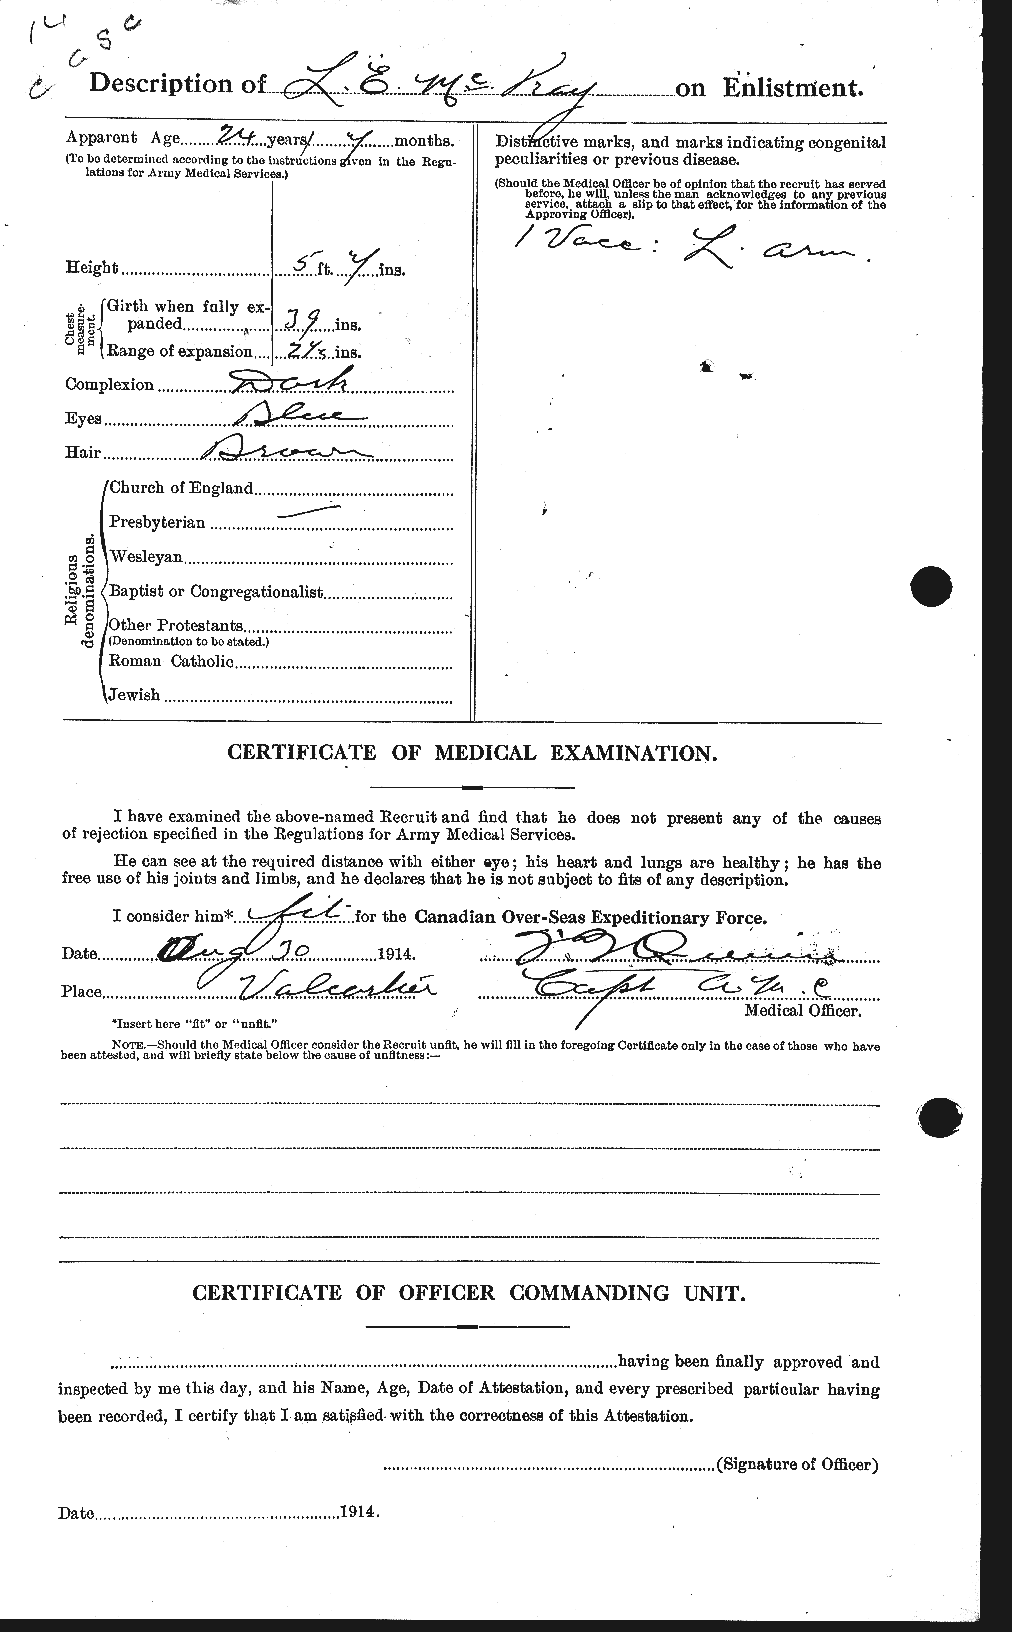 Personnel Records of the First World War - CEF 527148b